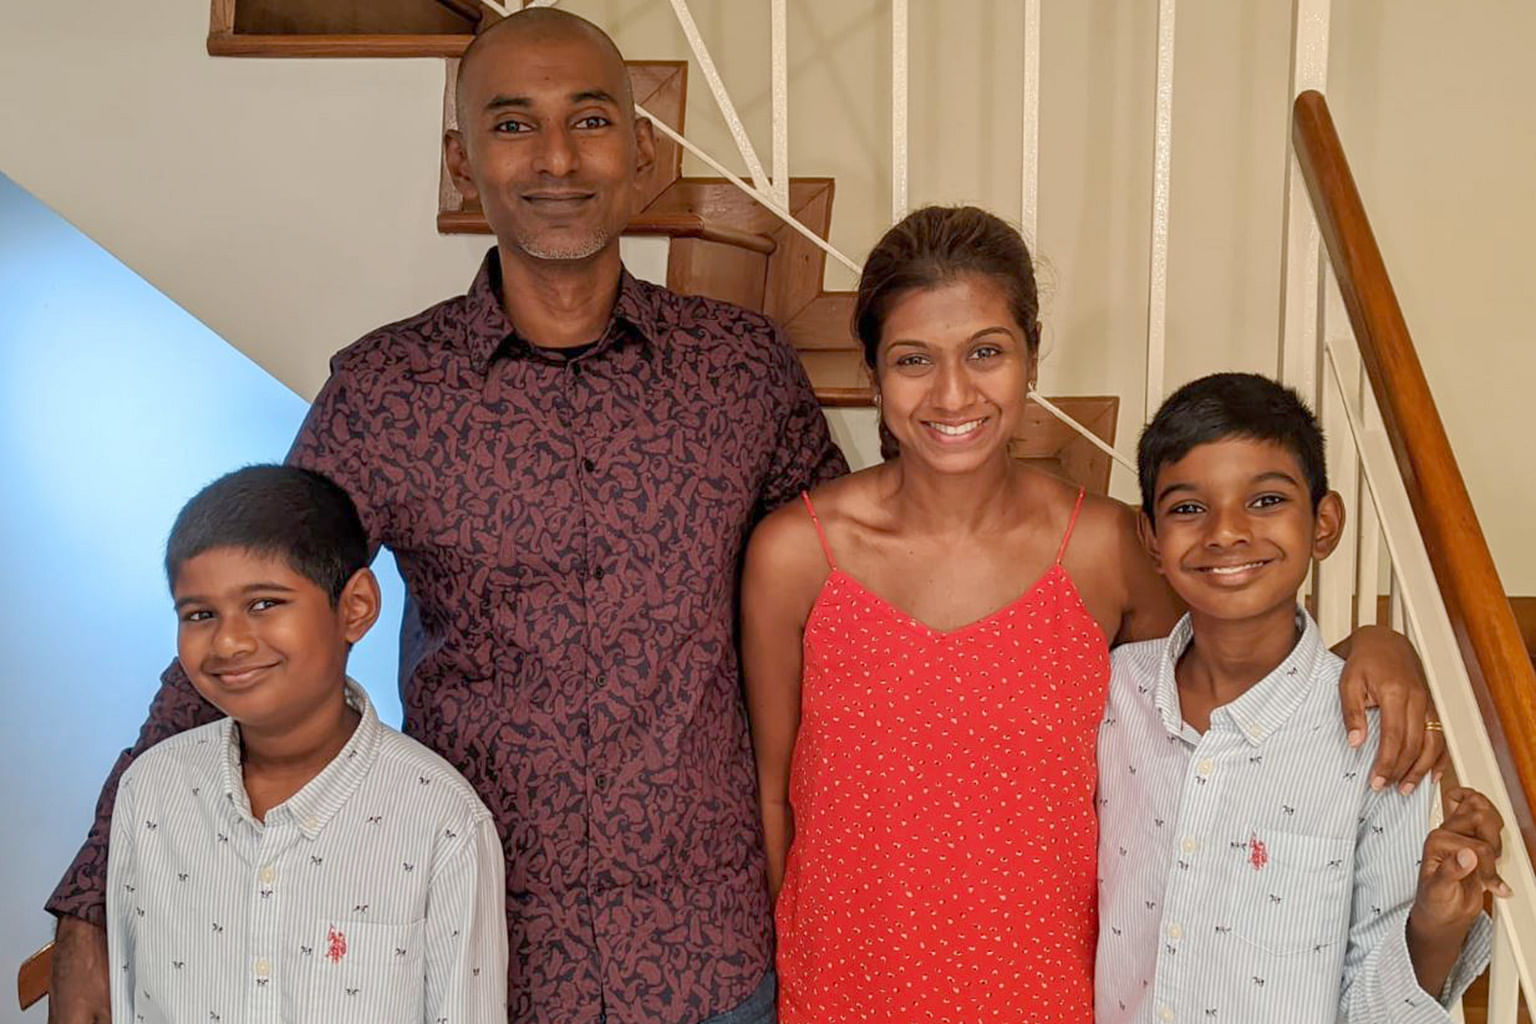 Ms Judith Alagirisamy – with her husband, Mr Savarimuthu Xavier, and their sons, Micah (right) and Ezra – is enjoying the unhurried time spent with the family during the circuit breaker period at home. 